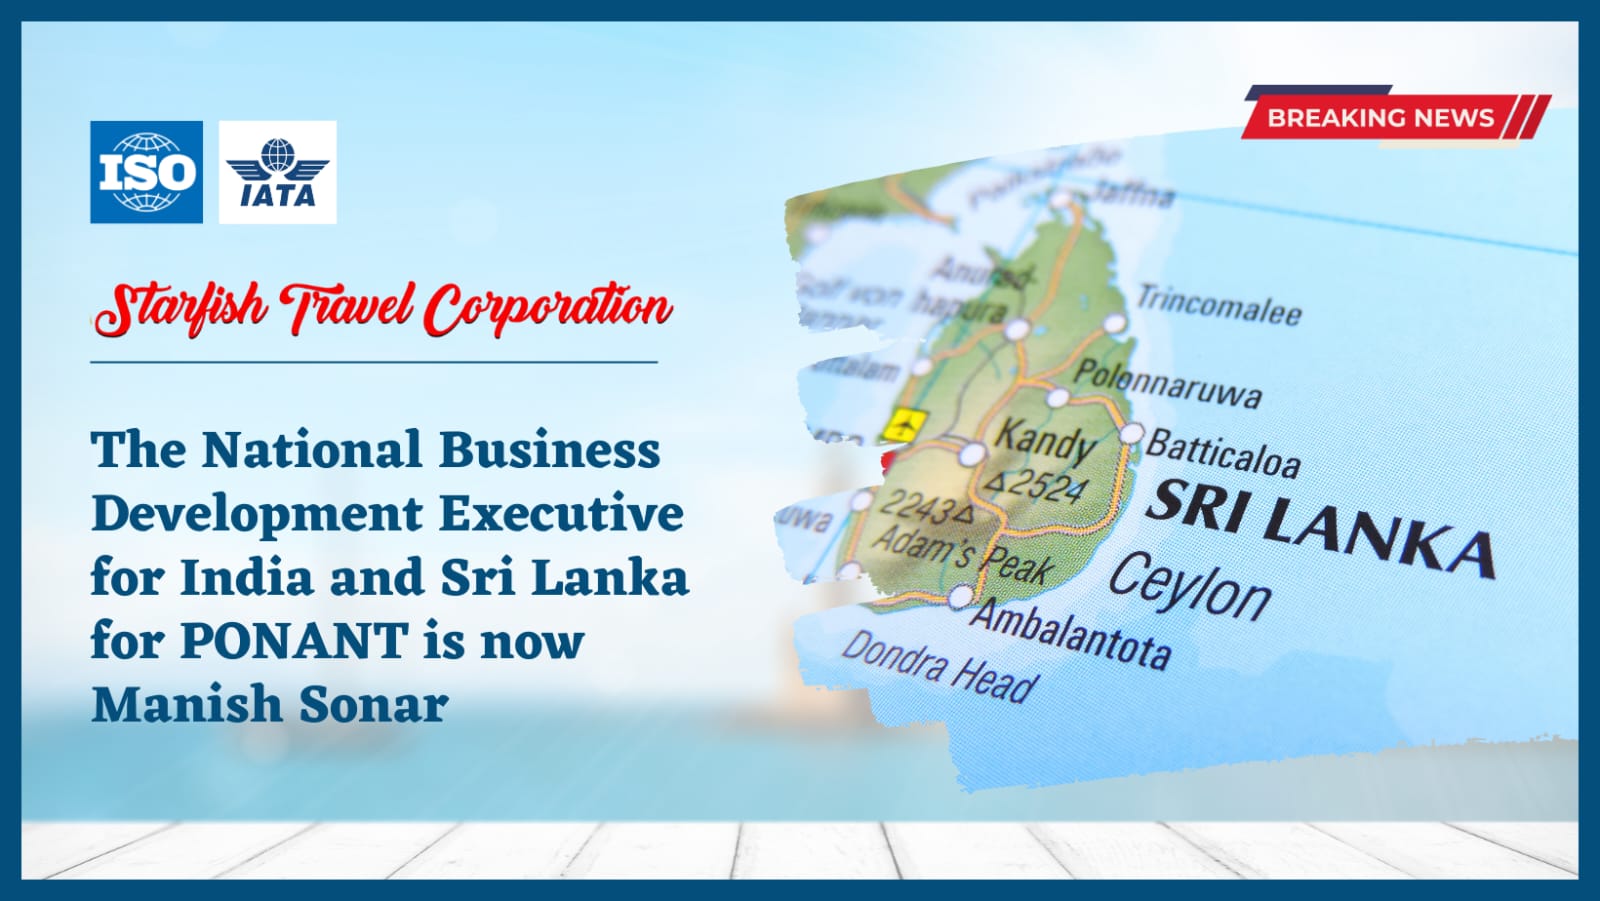 You are currently viewing The National Business Development Executive for India and Sri Lanka for PONANT is now Manish Sonar.